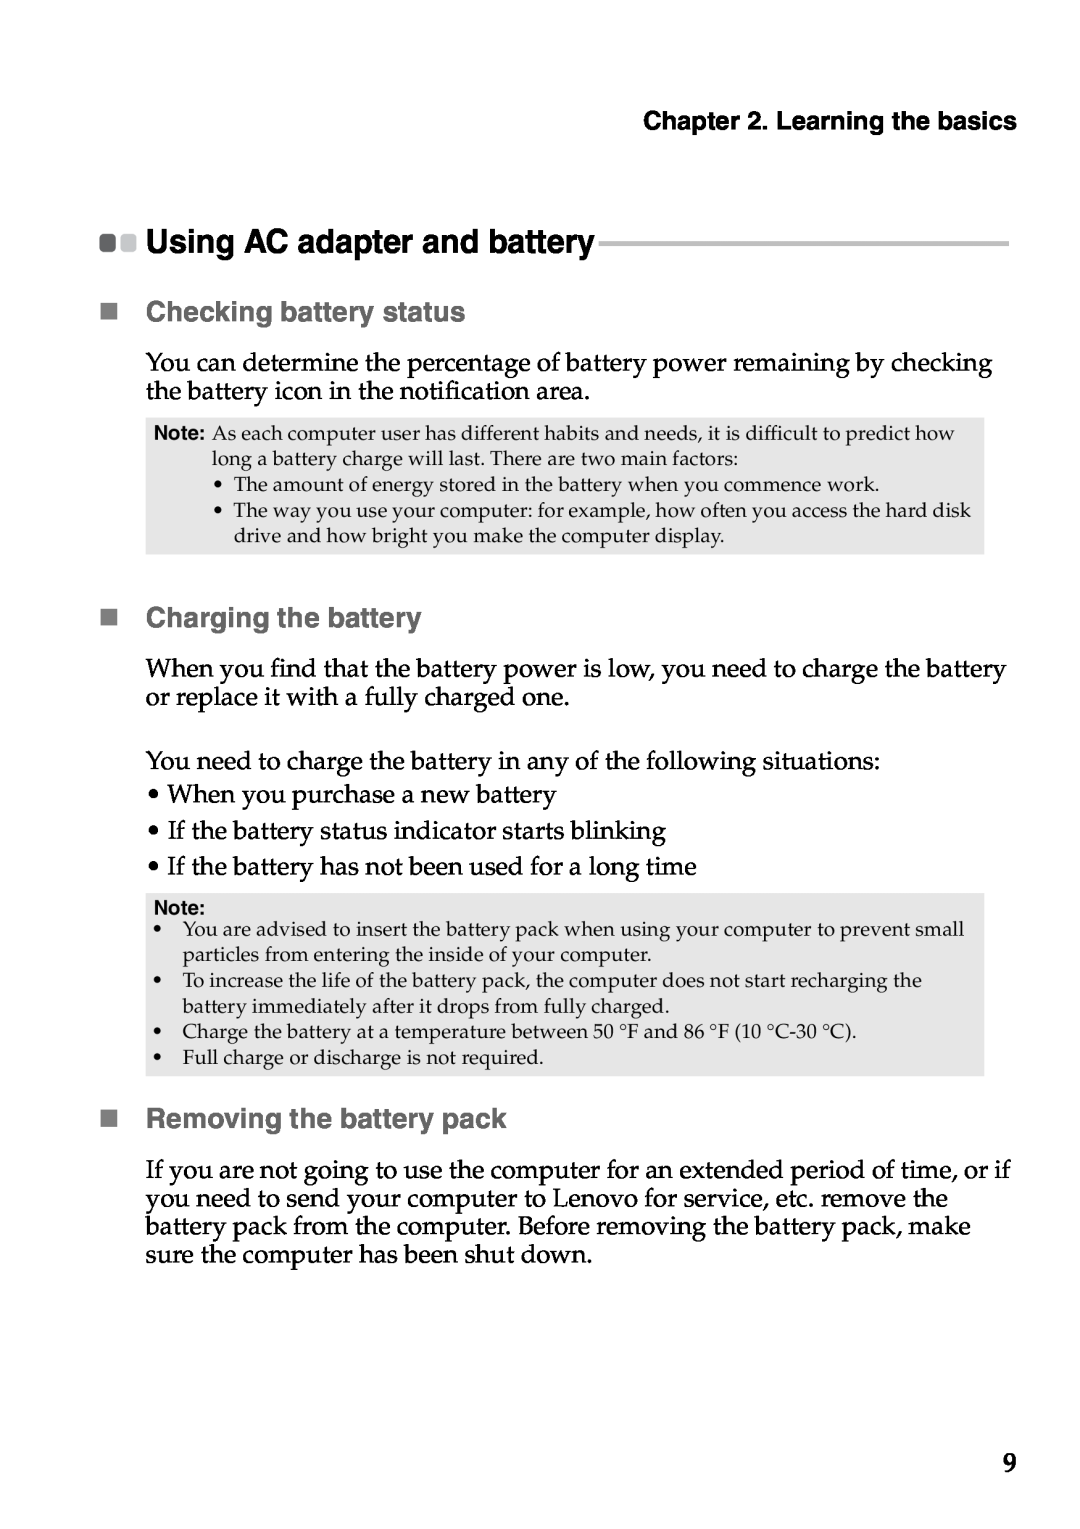 Lenovo S300 „ Checking battery status, „ Charging the battery, „ Removing the battery pack, Using AC adapter and battery 